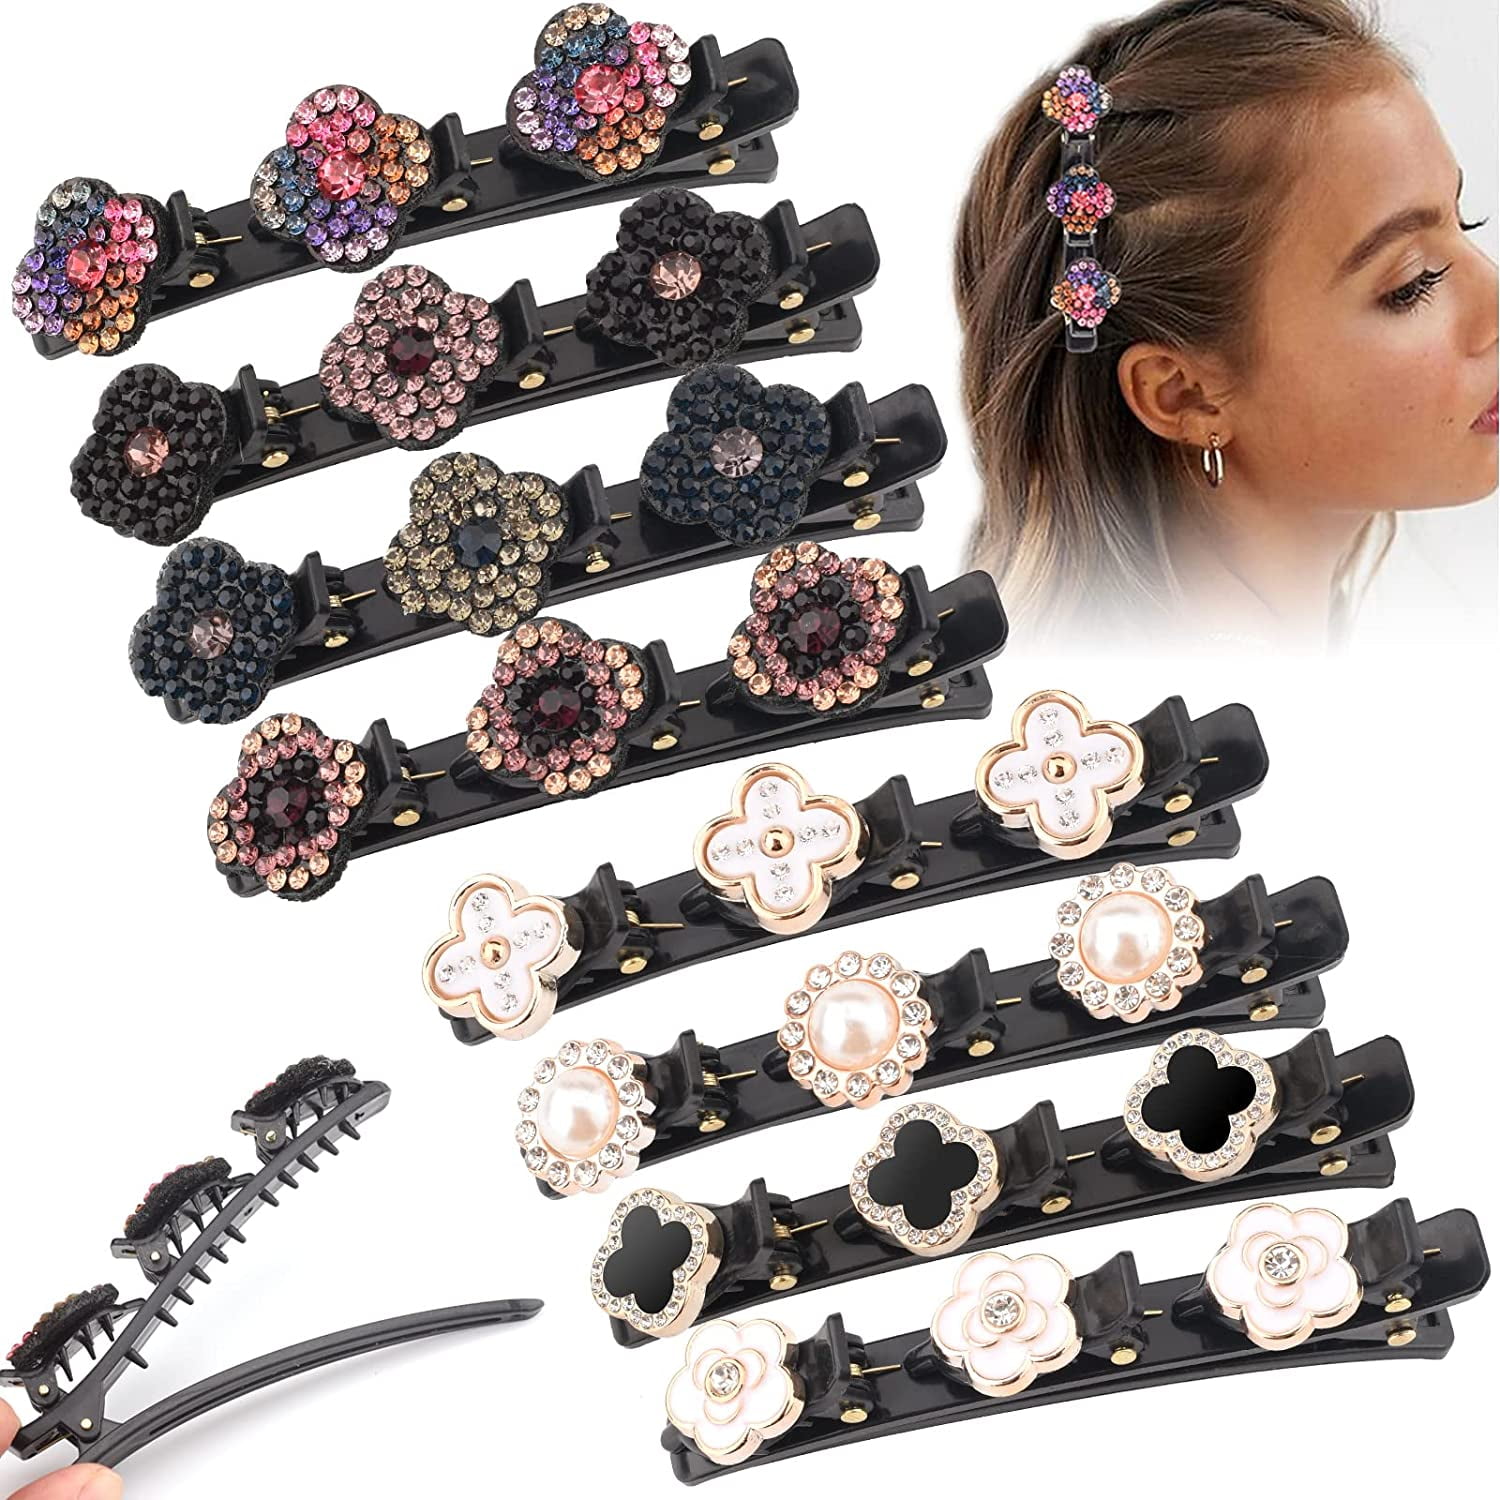 8PCS Braided Hair Clips For Women and Girls,Satin Fabric Hair  Bands,Four-Leaf Clover Chopped Hairpin Duckbill Clip,Rsvelte Sparkling  Crystal Stone Hair Clips with Rhinestones 